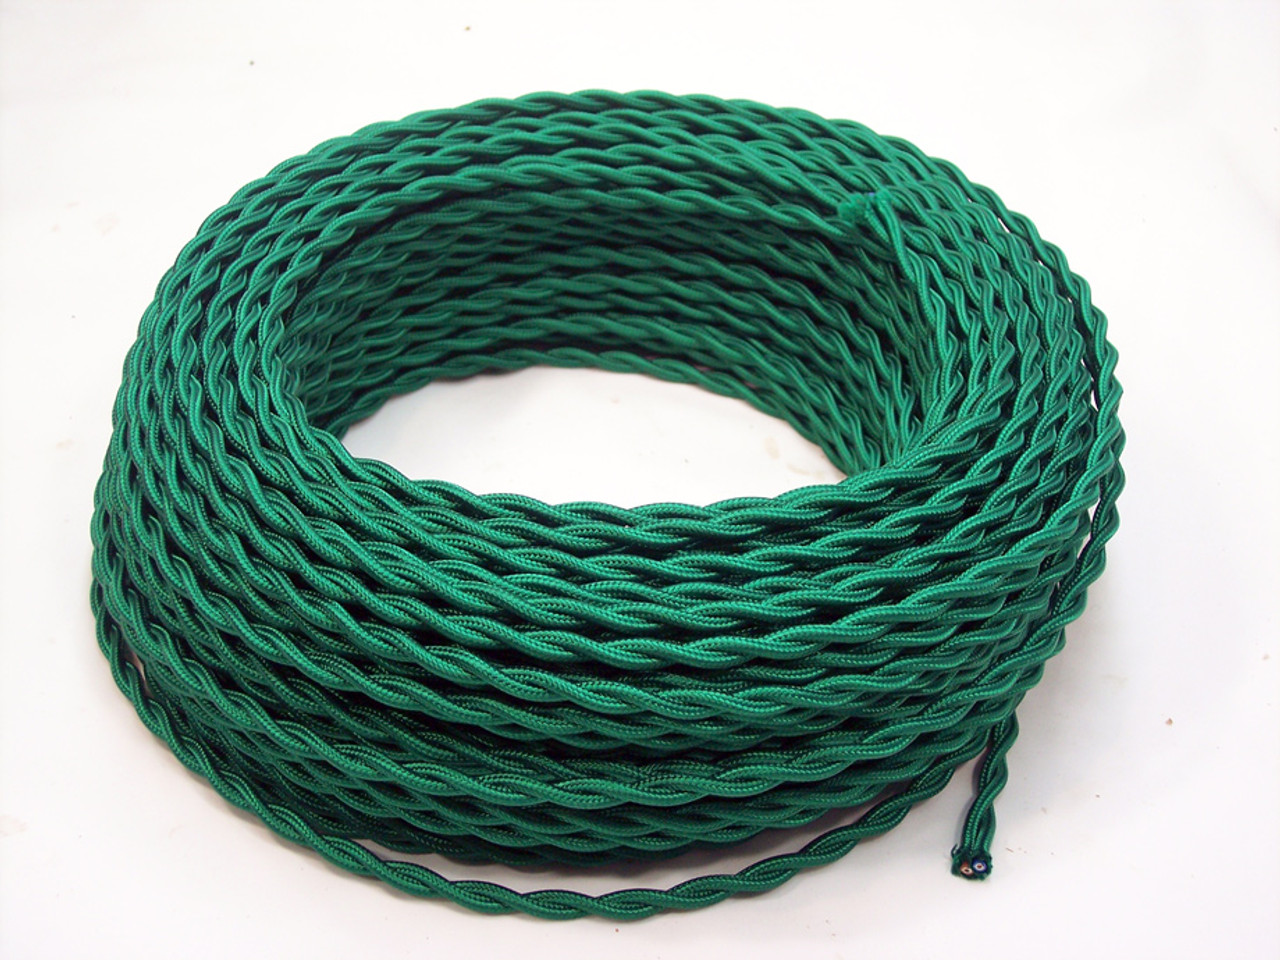 Green Rayon Cloth-Covered Twisted Electrical Wire - 18 Gauge - Bulk Roll